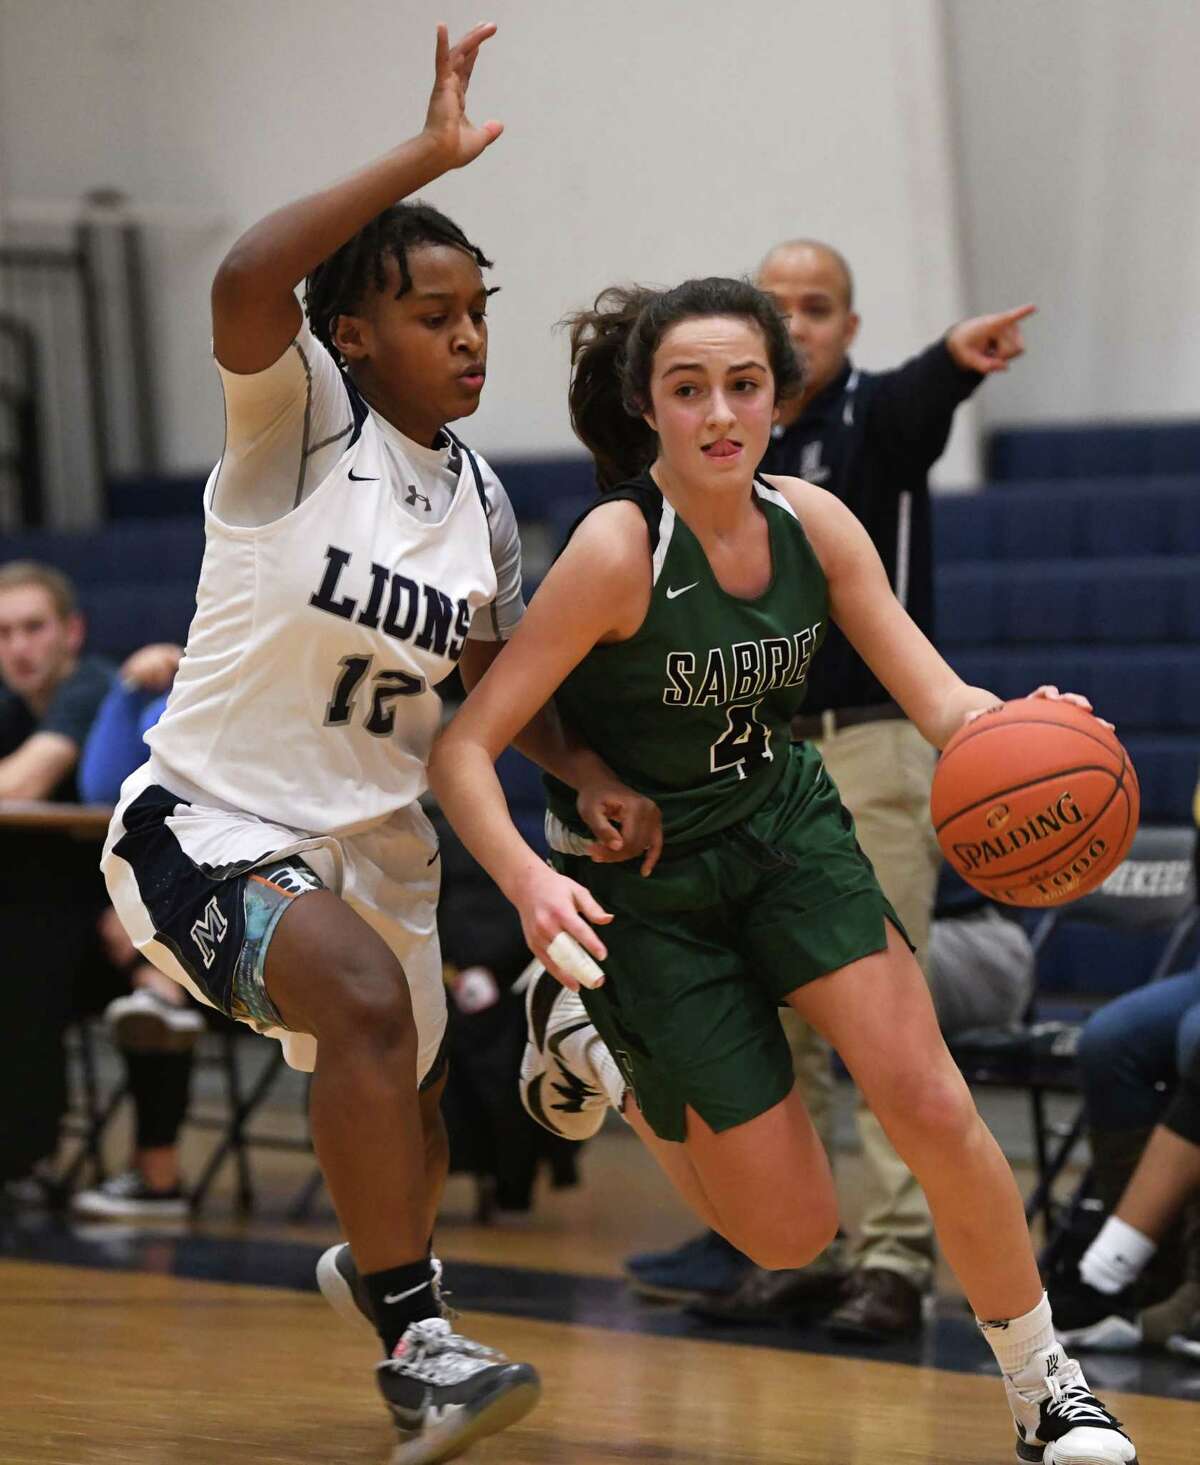 Schalmont's Payton Graber, right, said “I have been waiting for this for so long. I was so glad when I finally saw that,” about being able to start practicing on Feb. 1, pending county approval. (Lori Van Buren/Times Union)